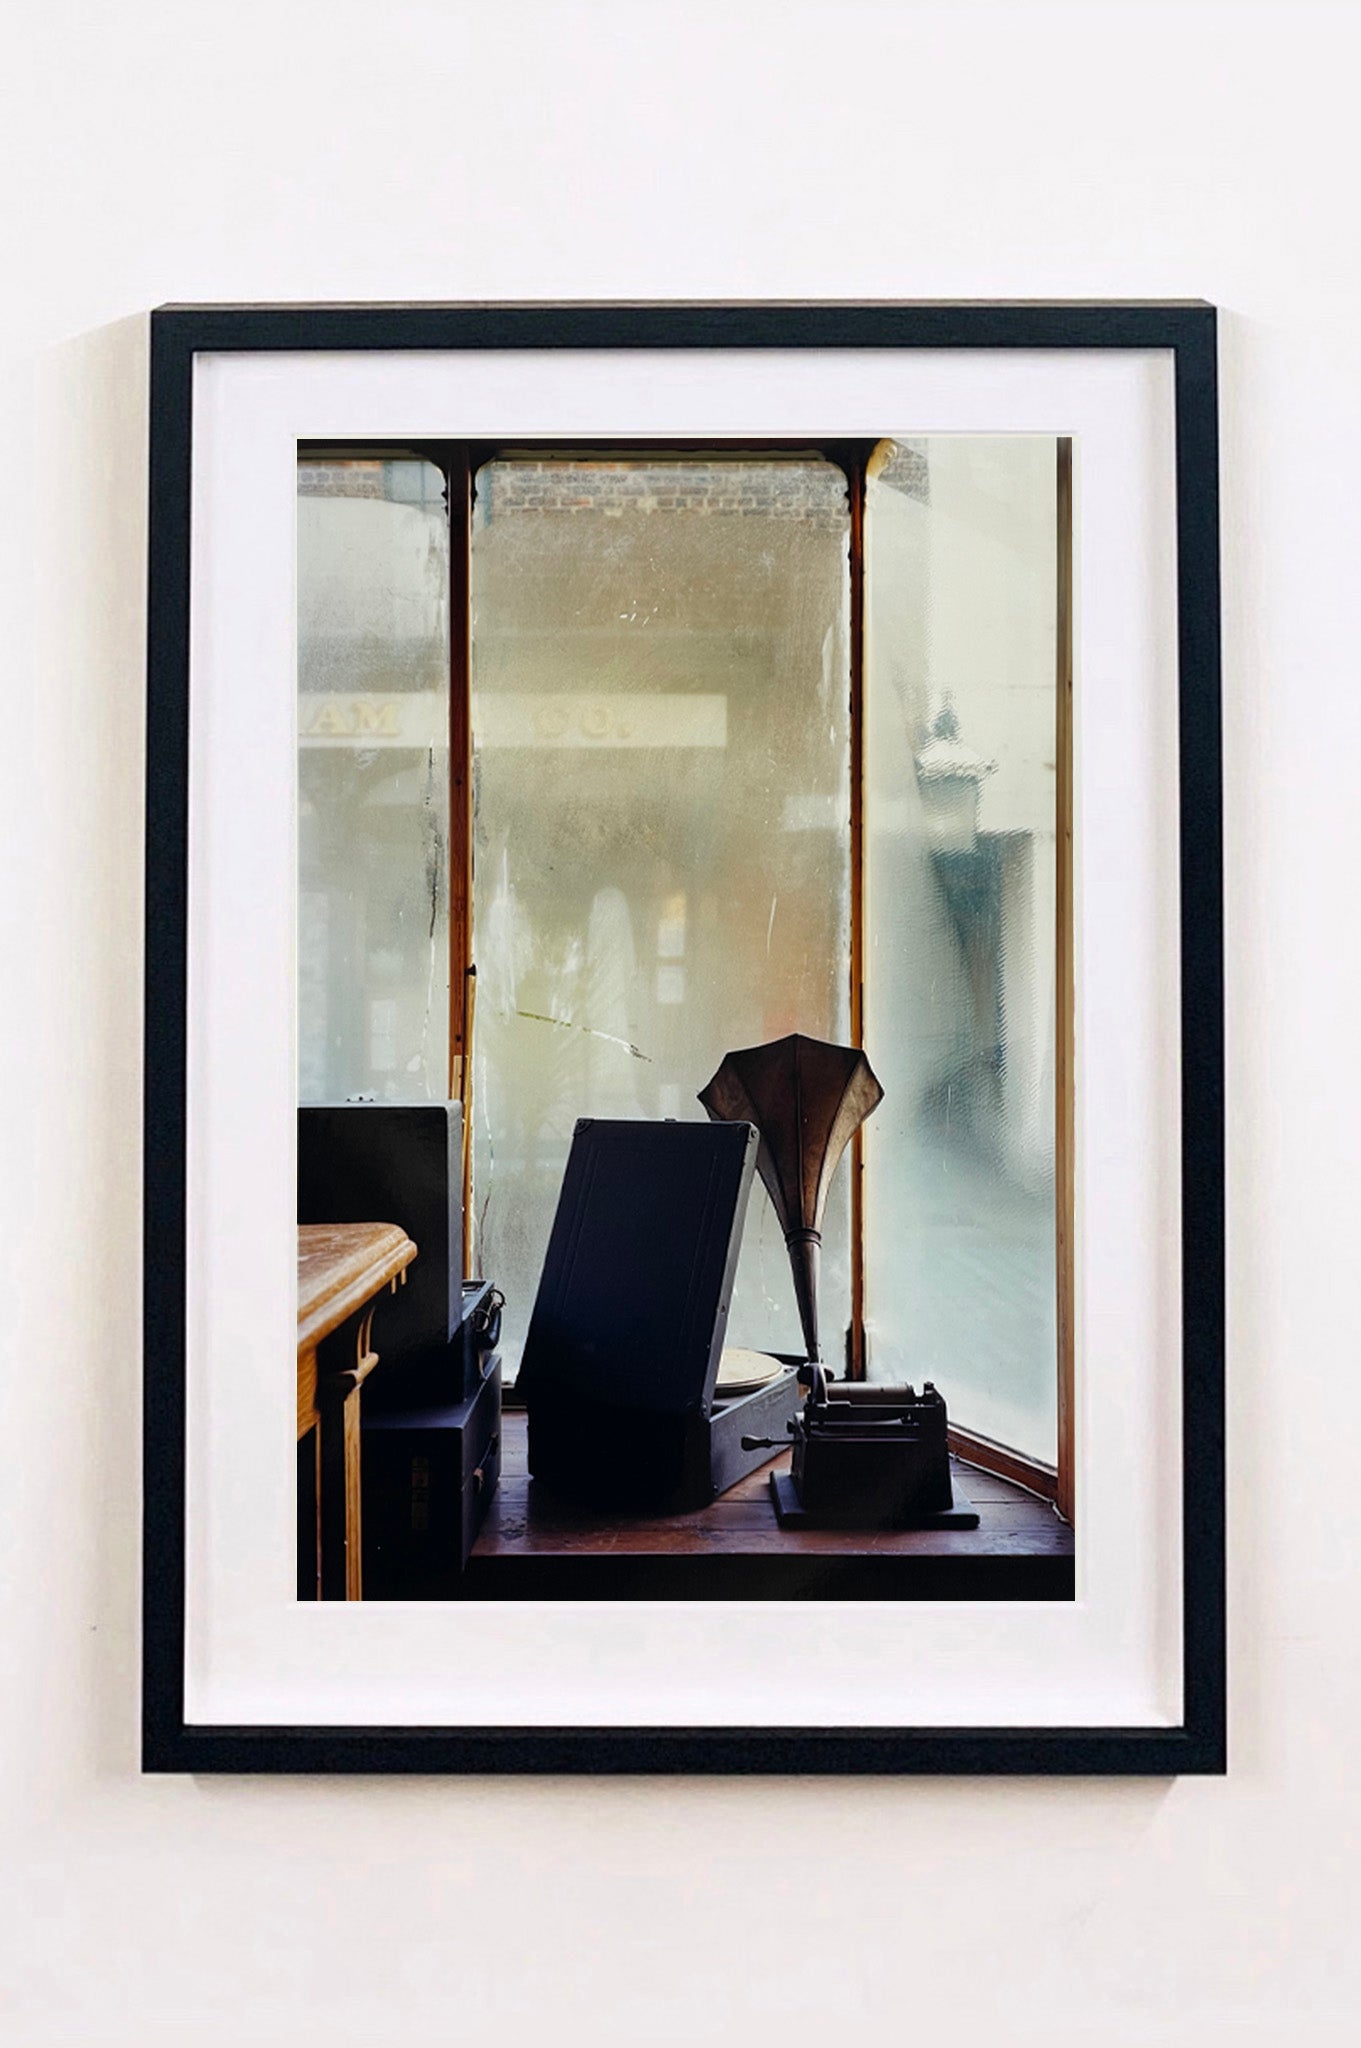 'Gramophone' by British photographer Richard Heeps who was commissioned to document Preston Hall Museum in Stockton-on-Tees before it underwent remodelling. This artwork that was created from the project is nostalgic and atmospheric.